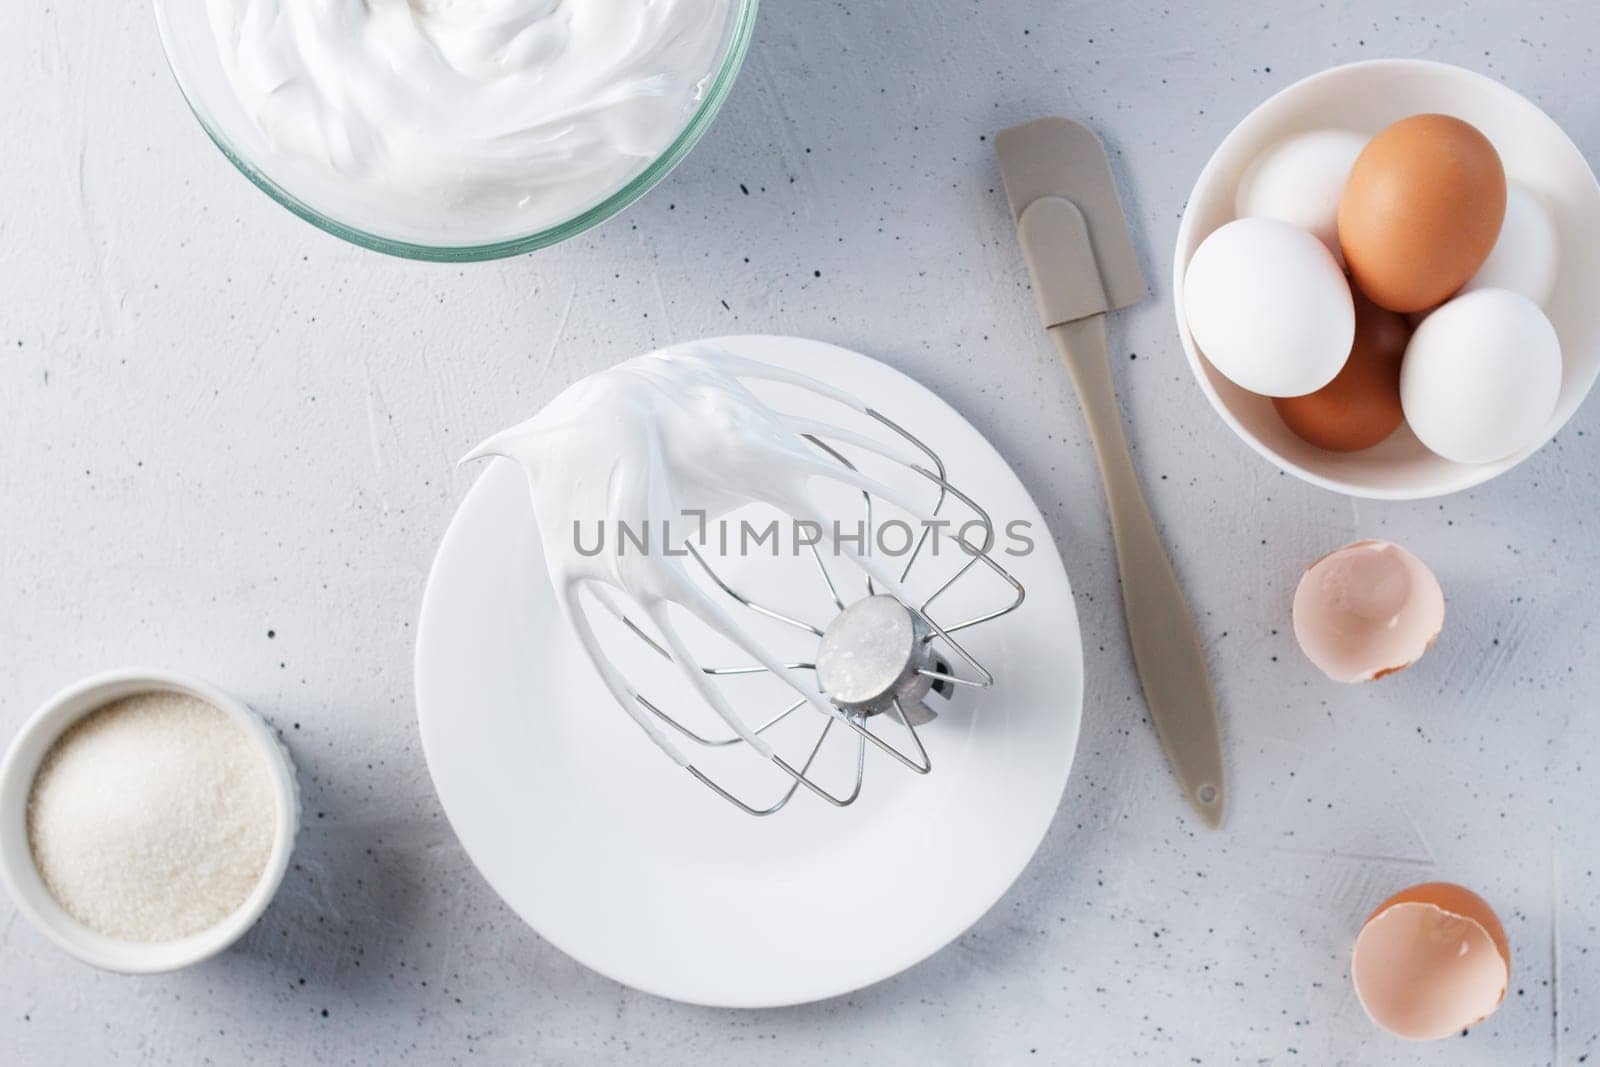 Whisked egg whites - whipped Italian meringue on a wire whisk and eggs on a gray background.